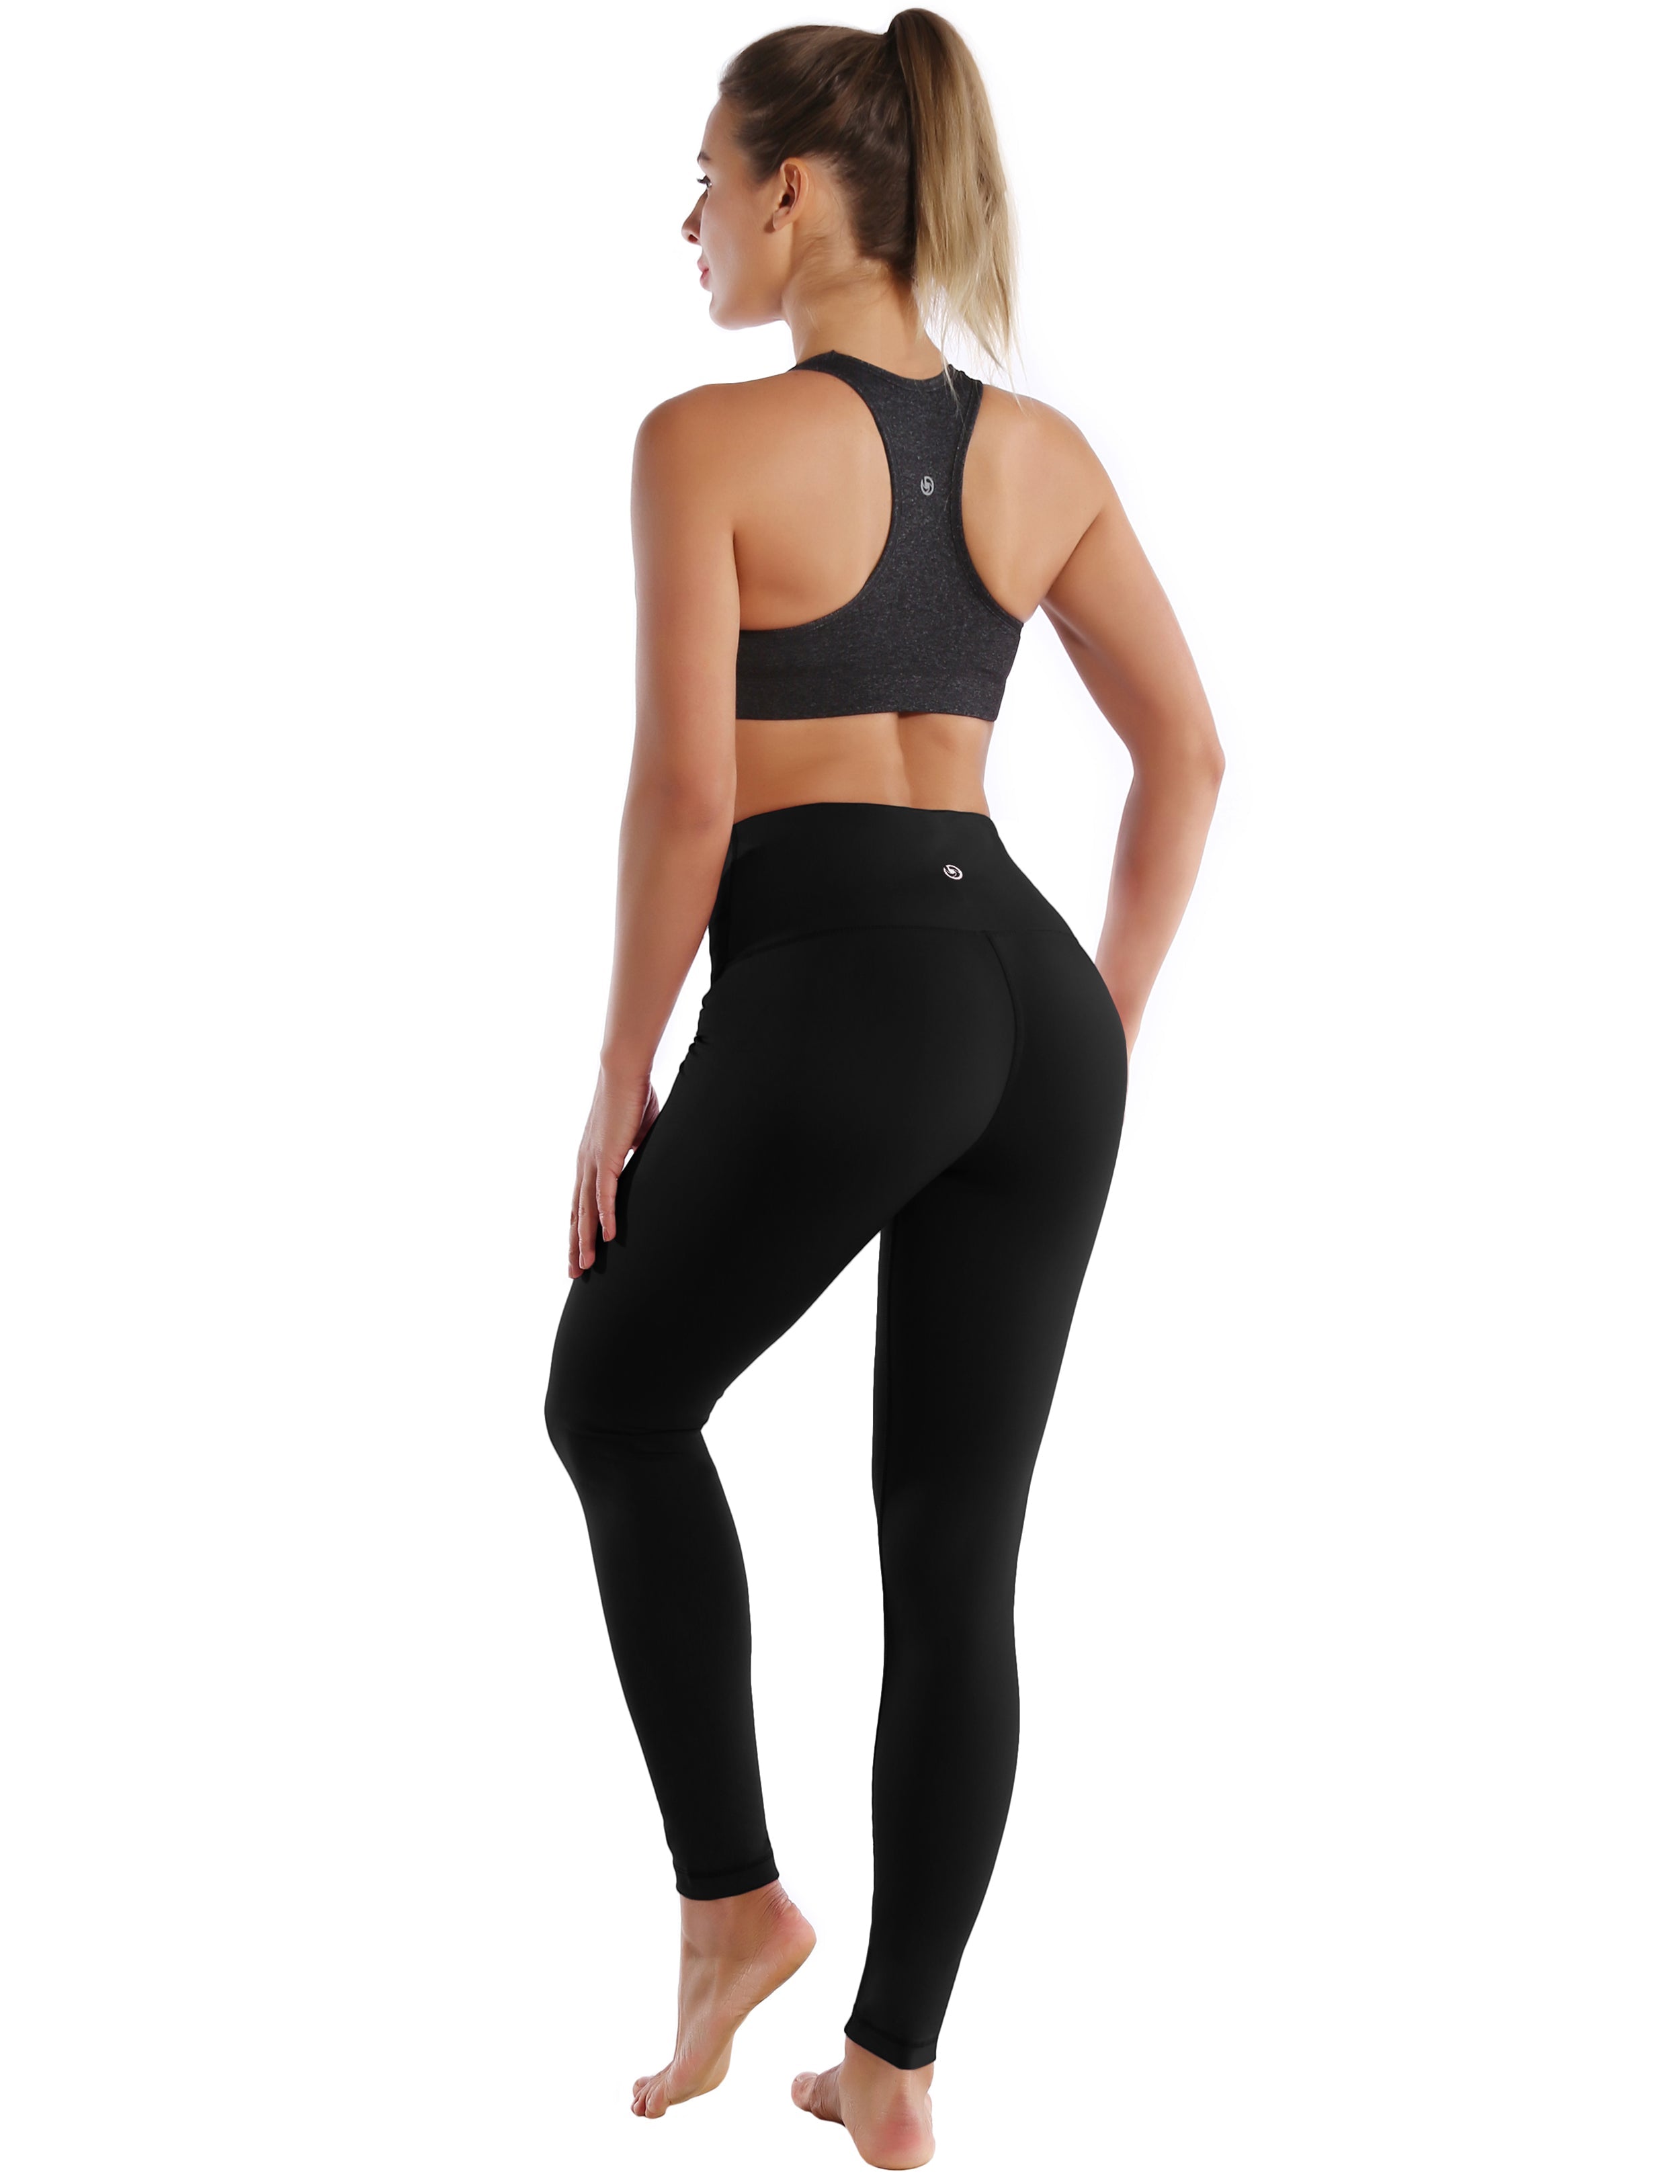 High Waist Jogging Pants black 75%Nylon/25%Spandex Fabric doesn't attract lint easily 4-way stretch No see-through Moisture-wicking Tummy control Inner pocket Four lengths